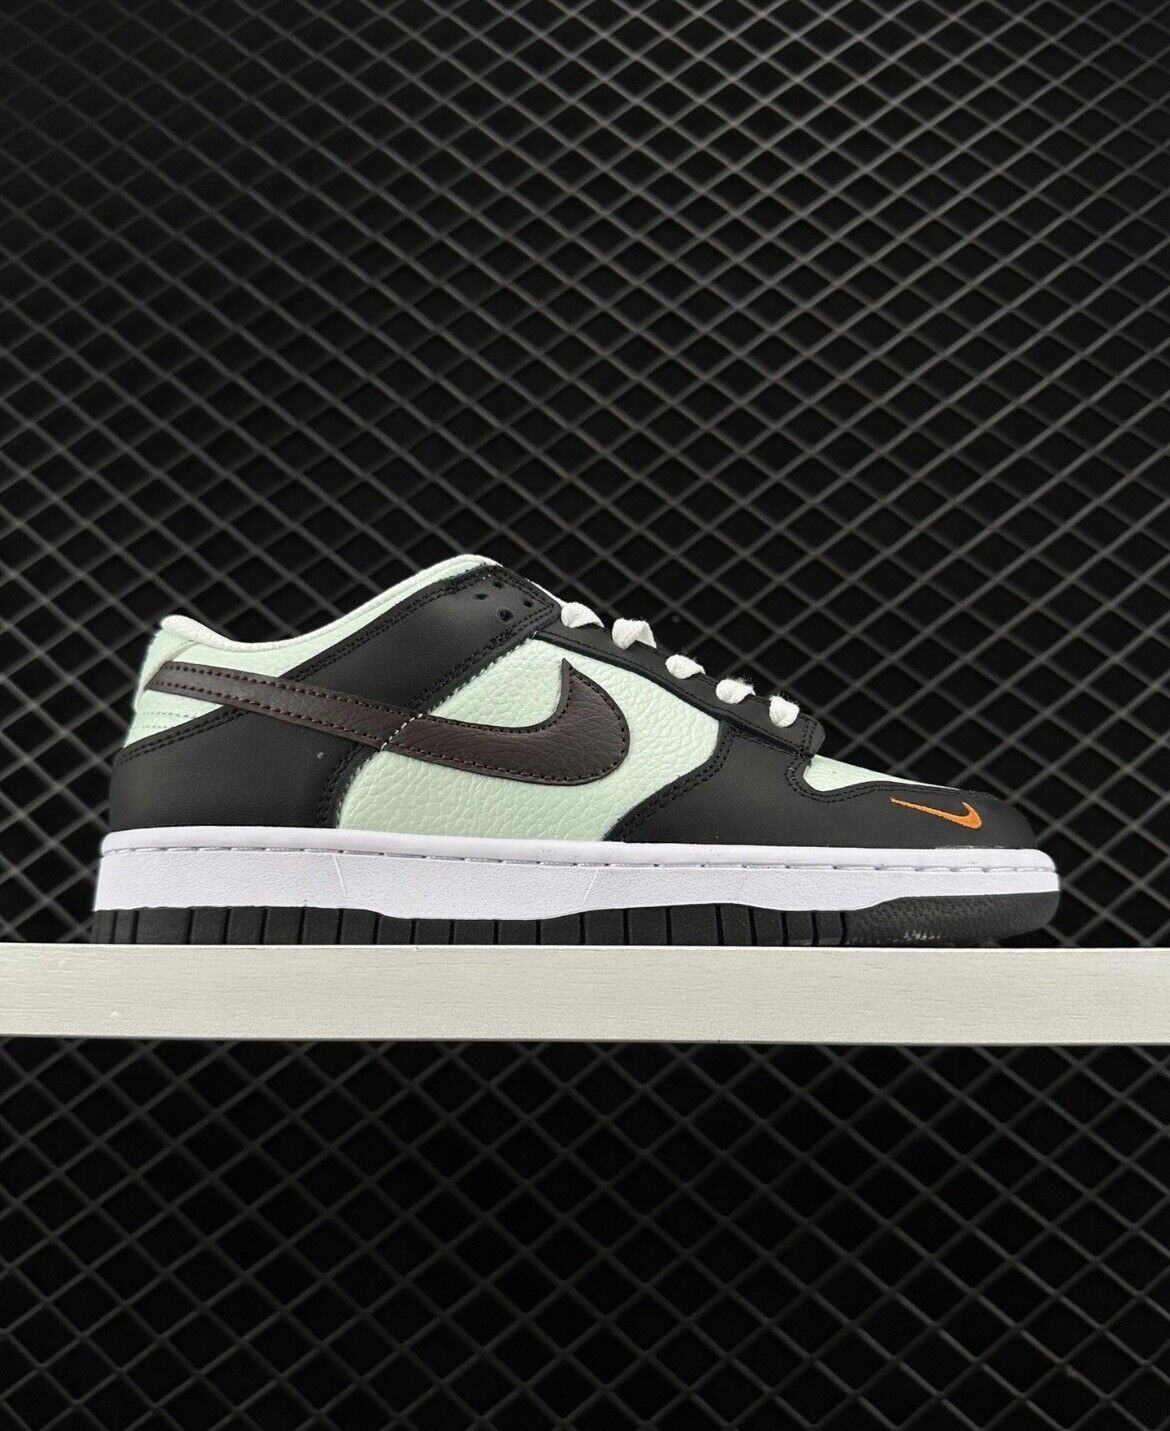 Ask for size- Nike SB Dunk Low light green black 